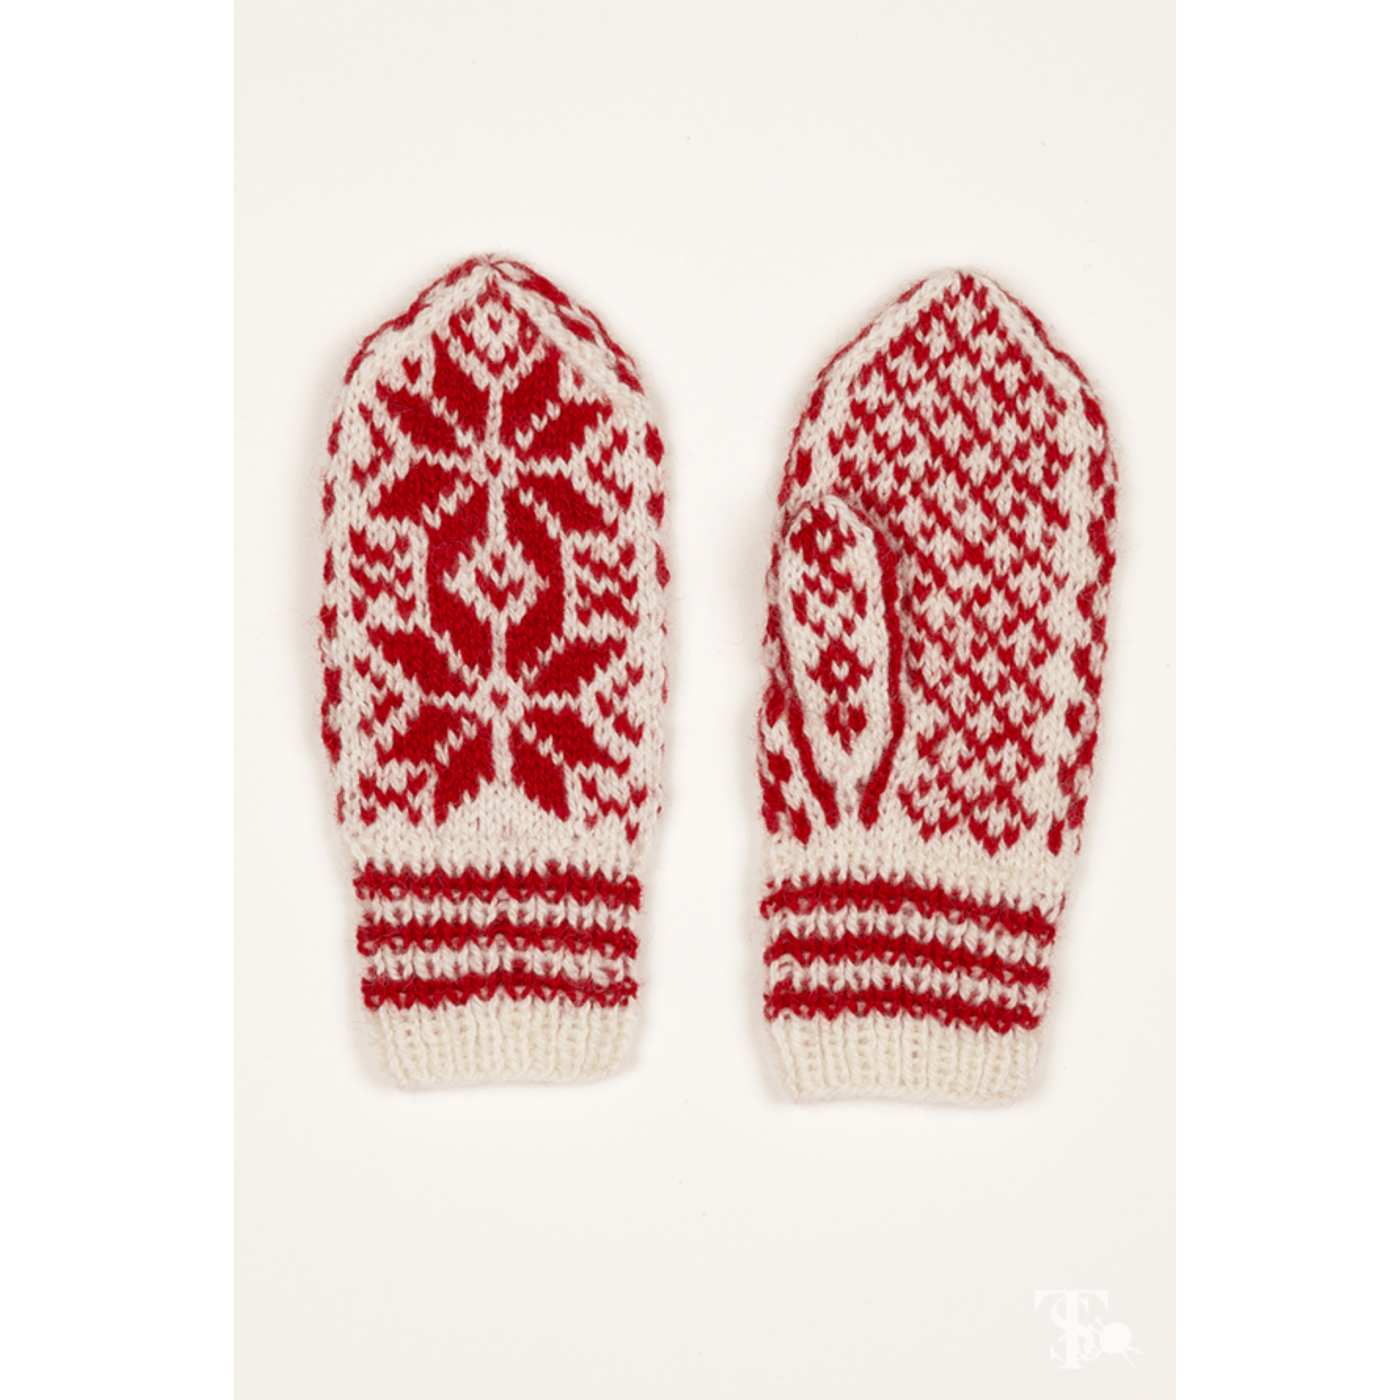 Pair of Red and White Selbu Mittens from the Selbu Mittens book by Anne Bårdsgård.